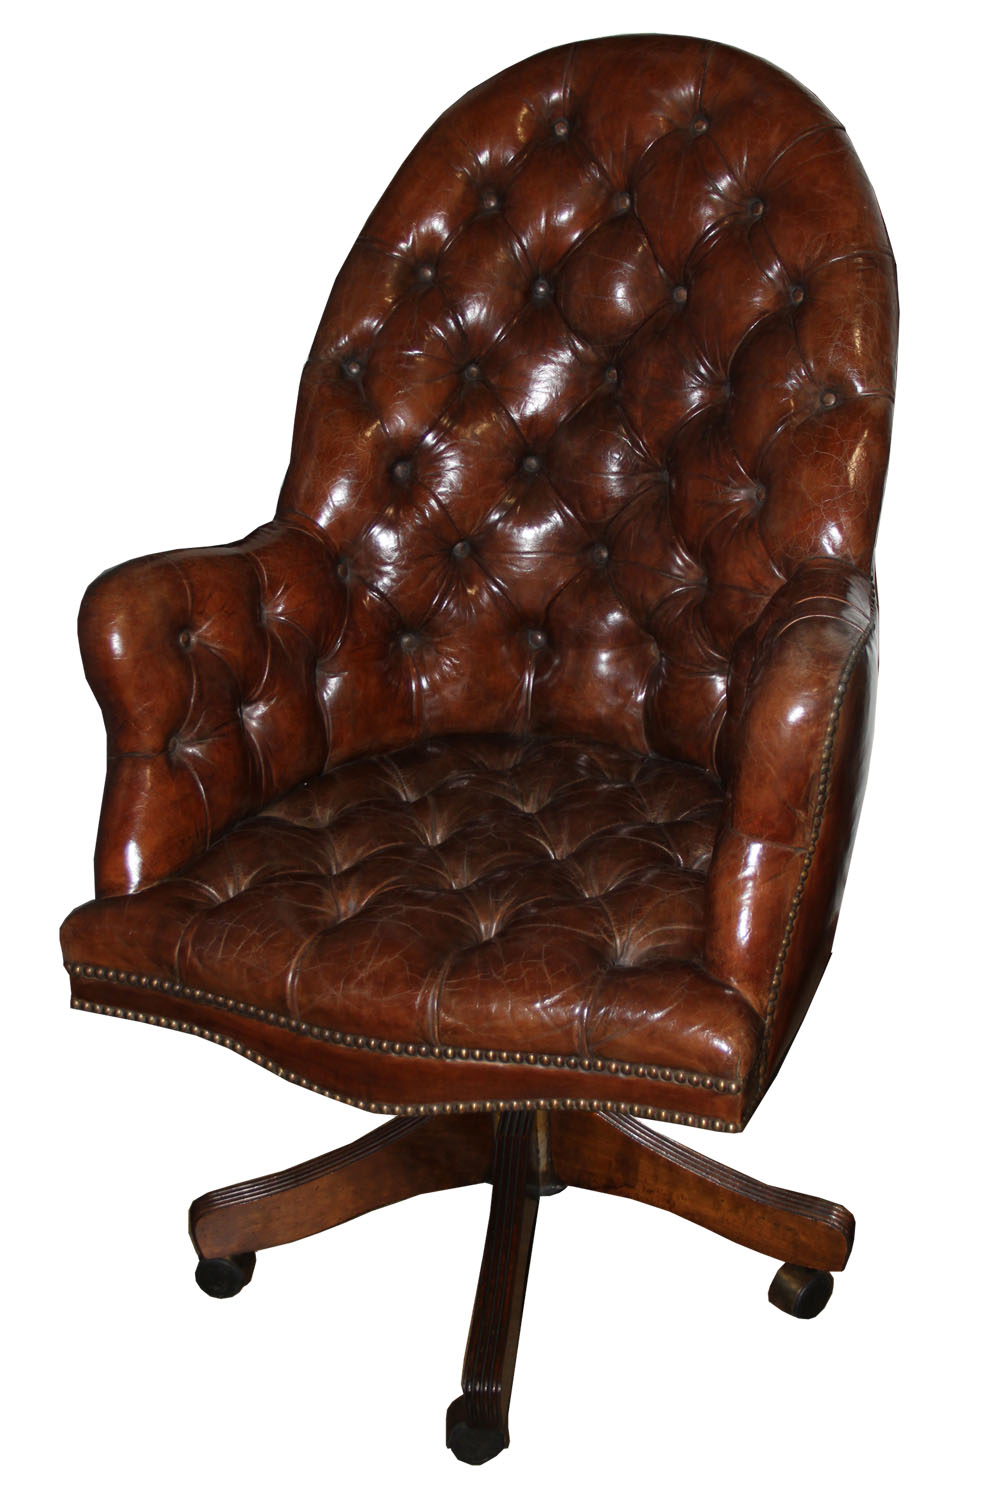 From the Mariani Privé Custom Workshop, A Classic English Tufted and Adjustable Swivel Desk Chair No. 4466